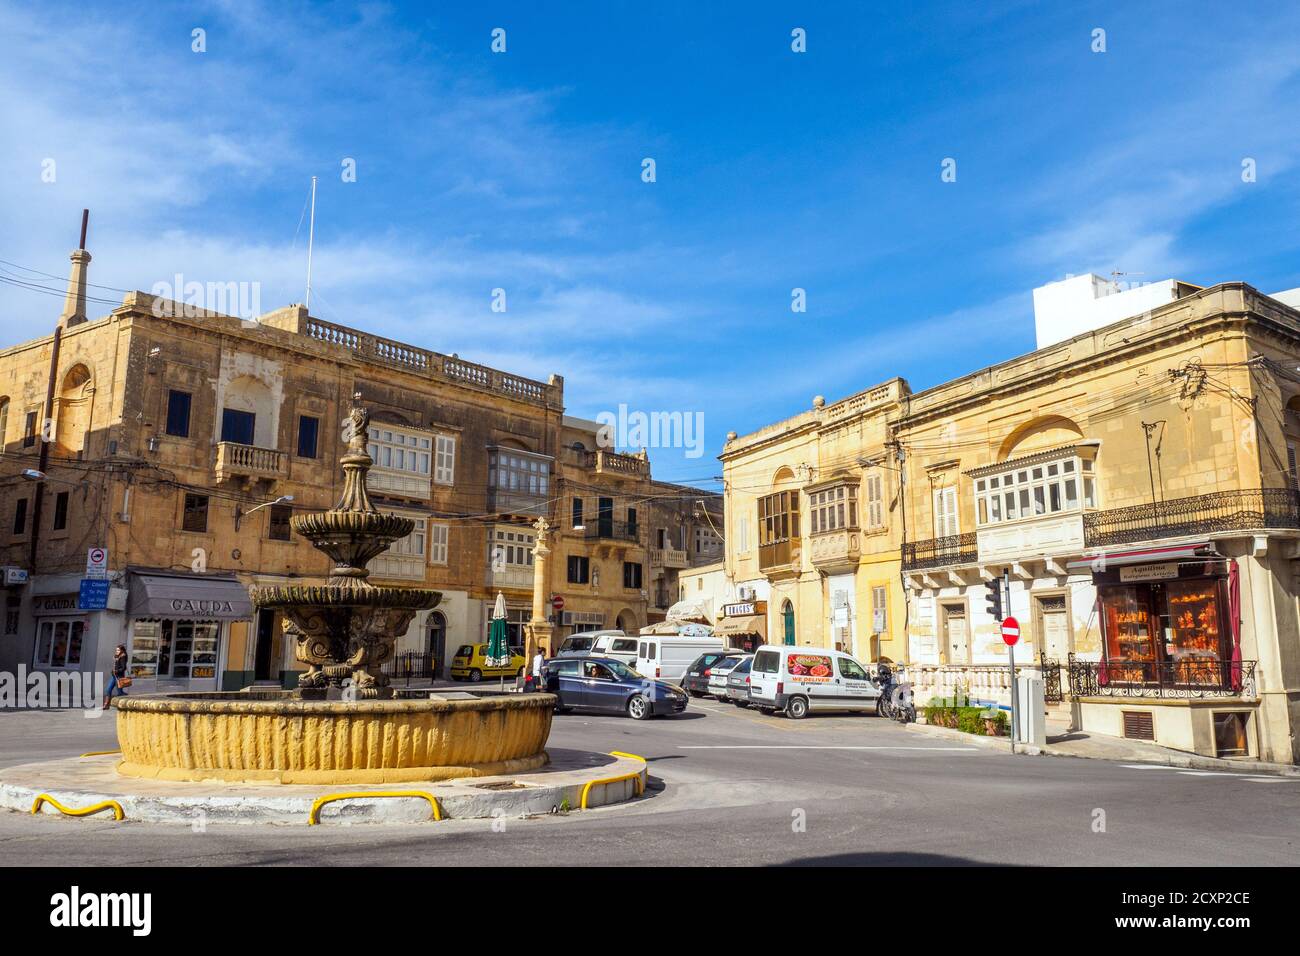 Medieval square of St. Francis and streets with fountain in the Victoria Rabat town - Gozo island, Malta Stock Photo